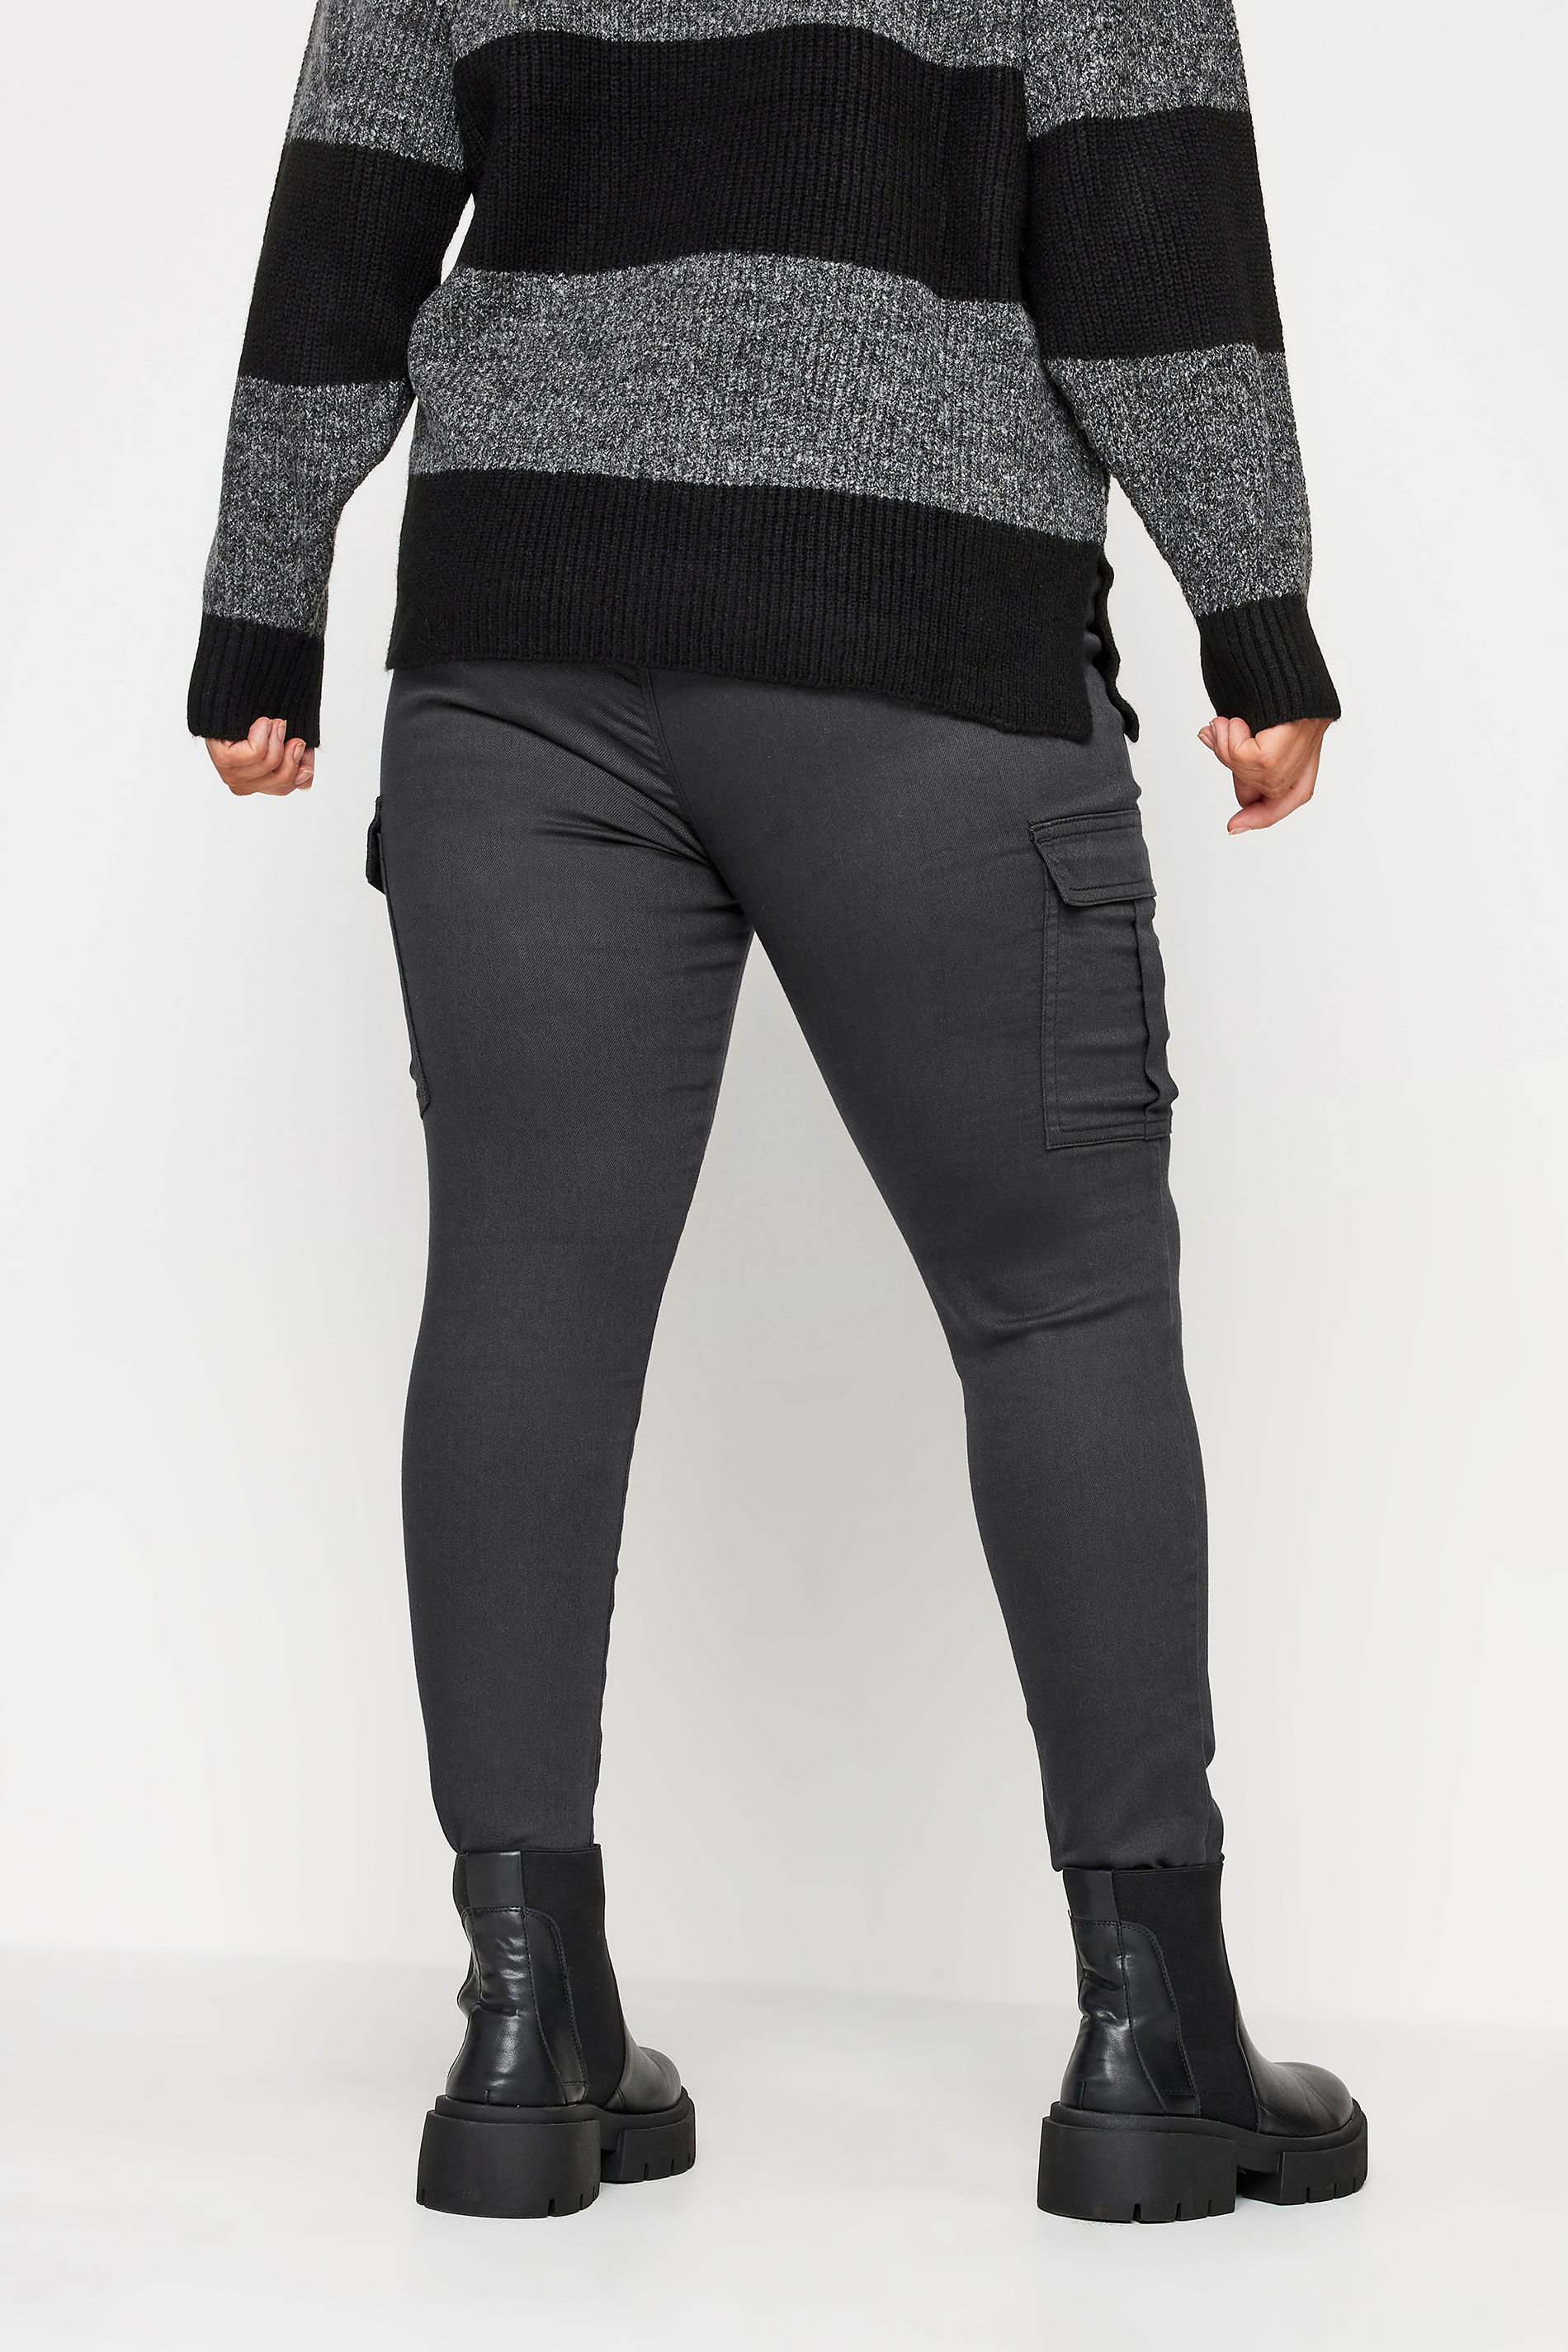 YOURS Plus Size Charcoal Grey Cargo GRACE Jeggings | Yours Clothing 3